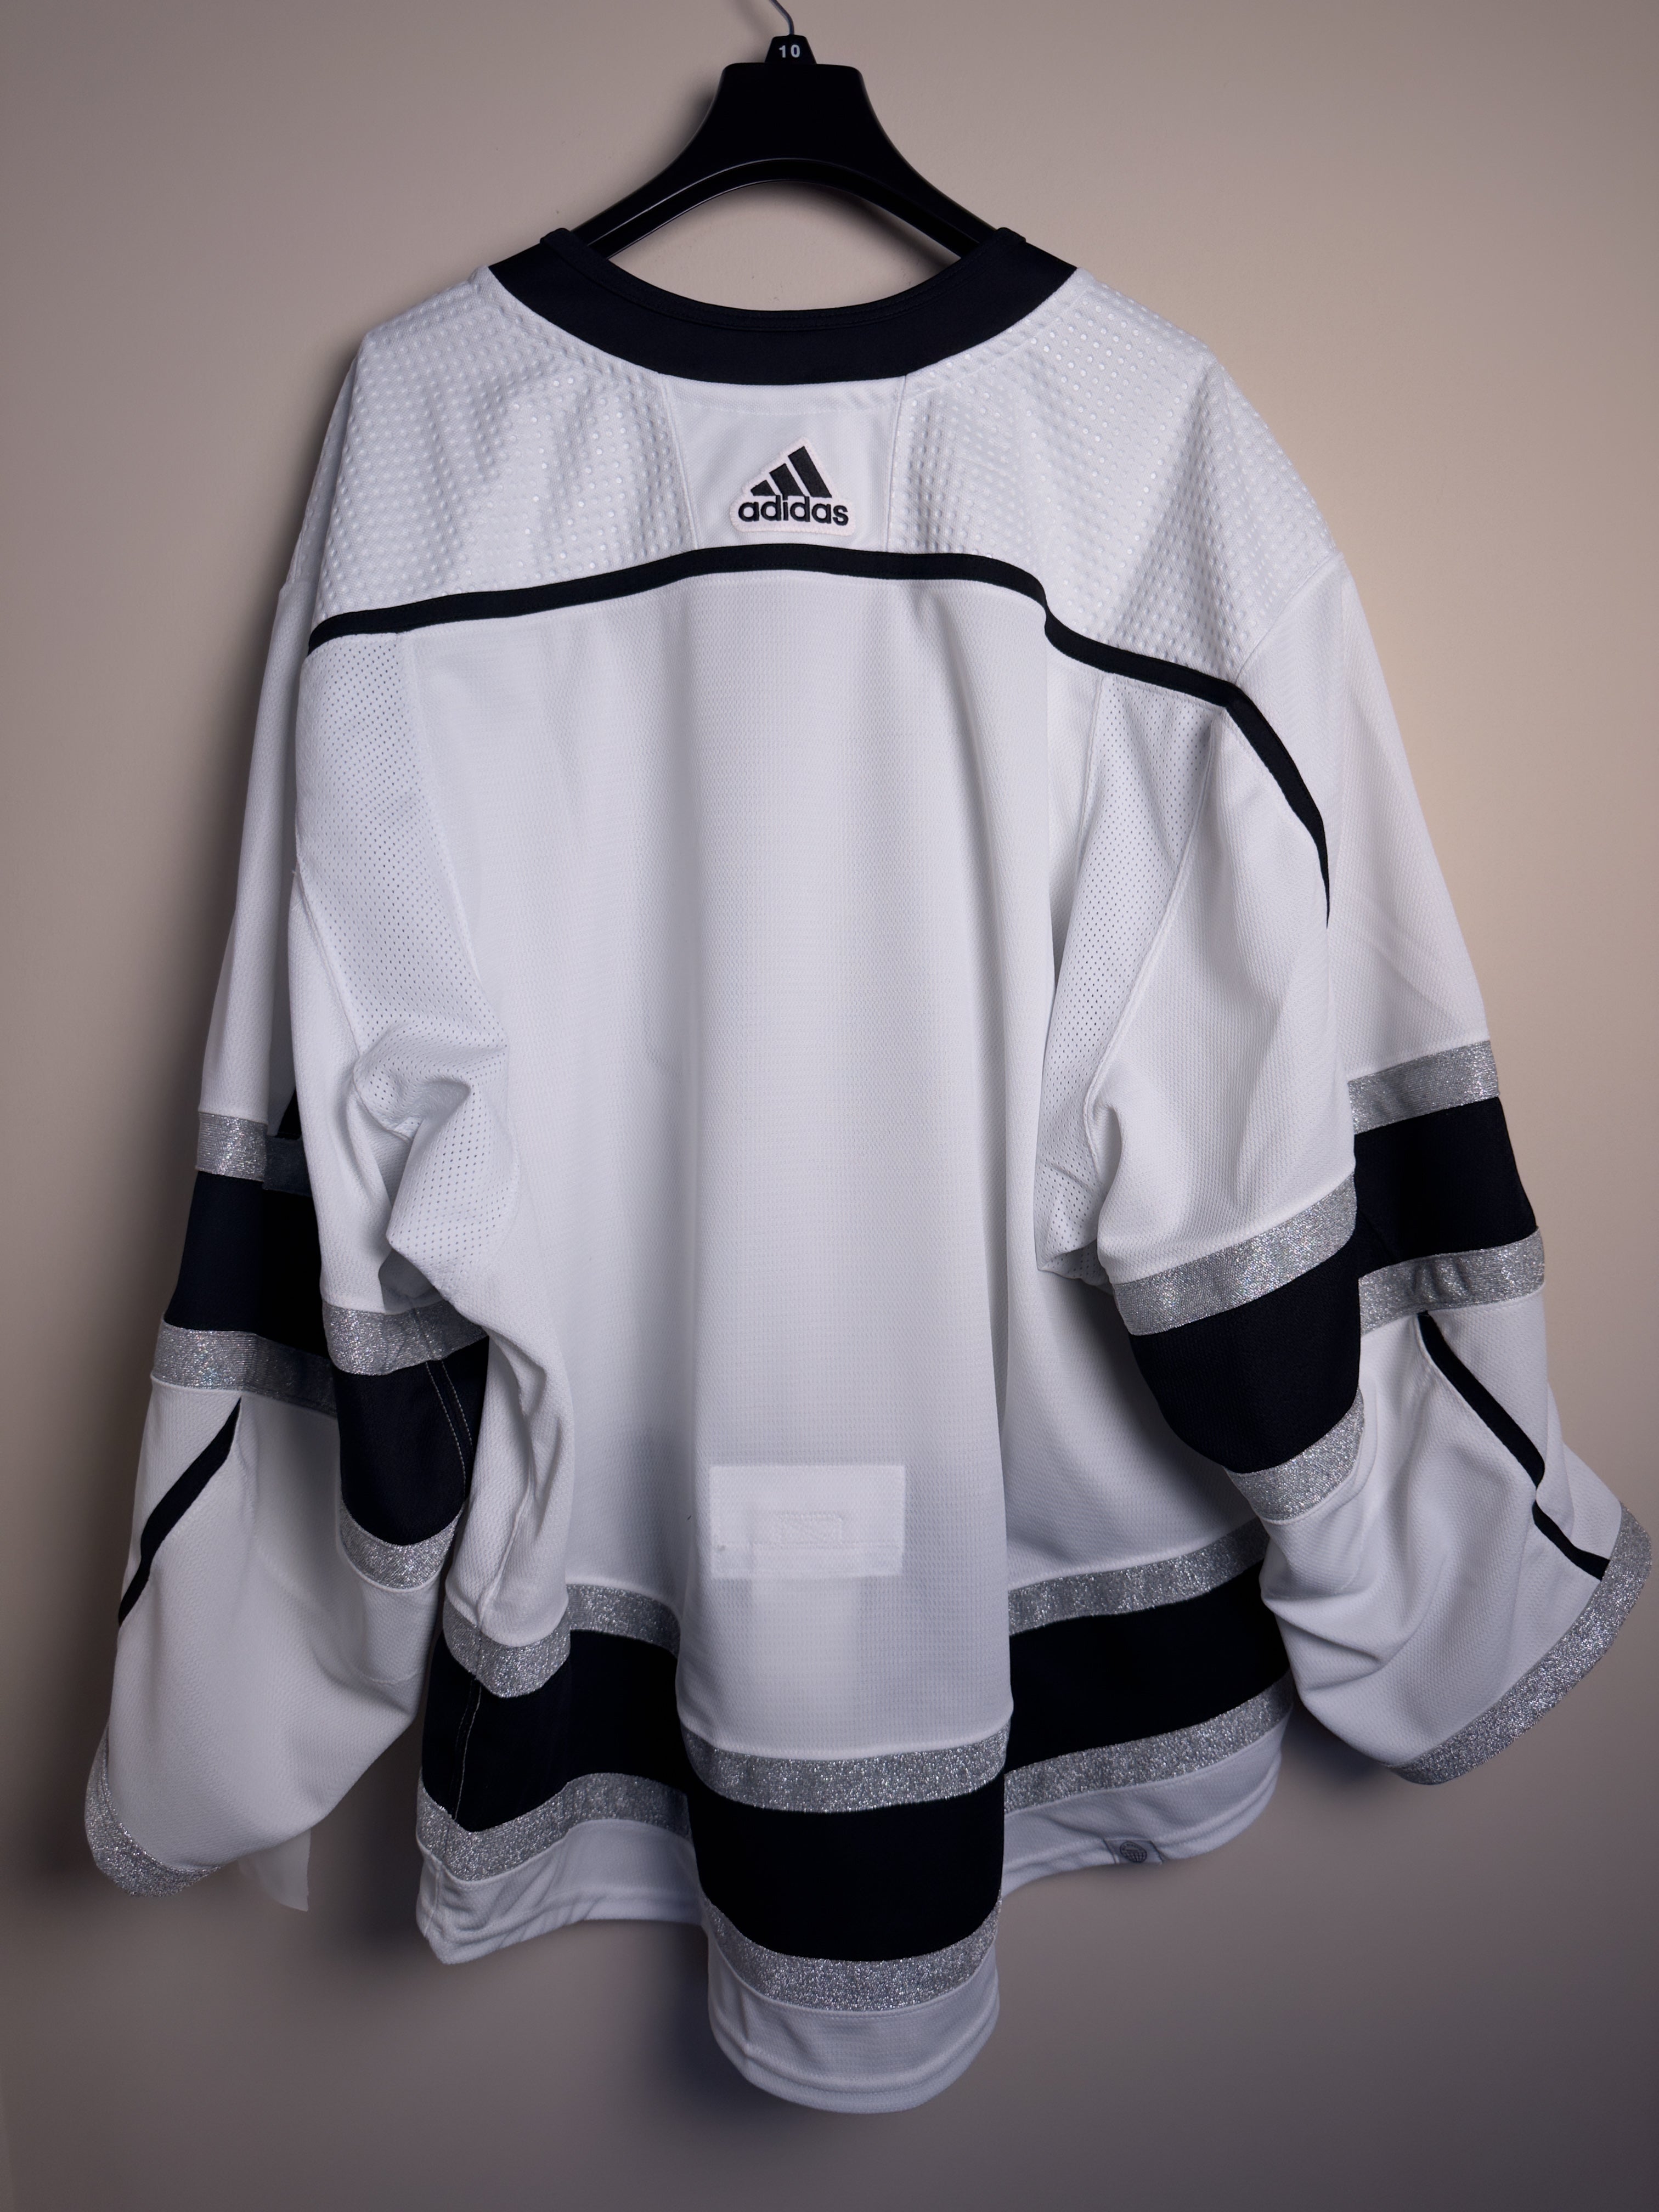 Los Angeles Kings NHL Adidas MiC Team Issued Away Jersey Size 58G (Goalie Cut)